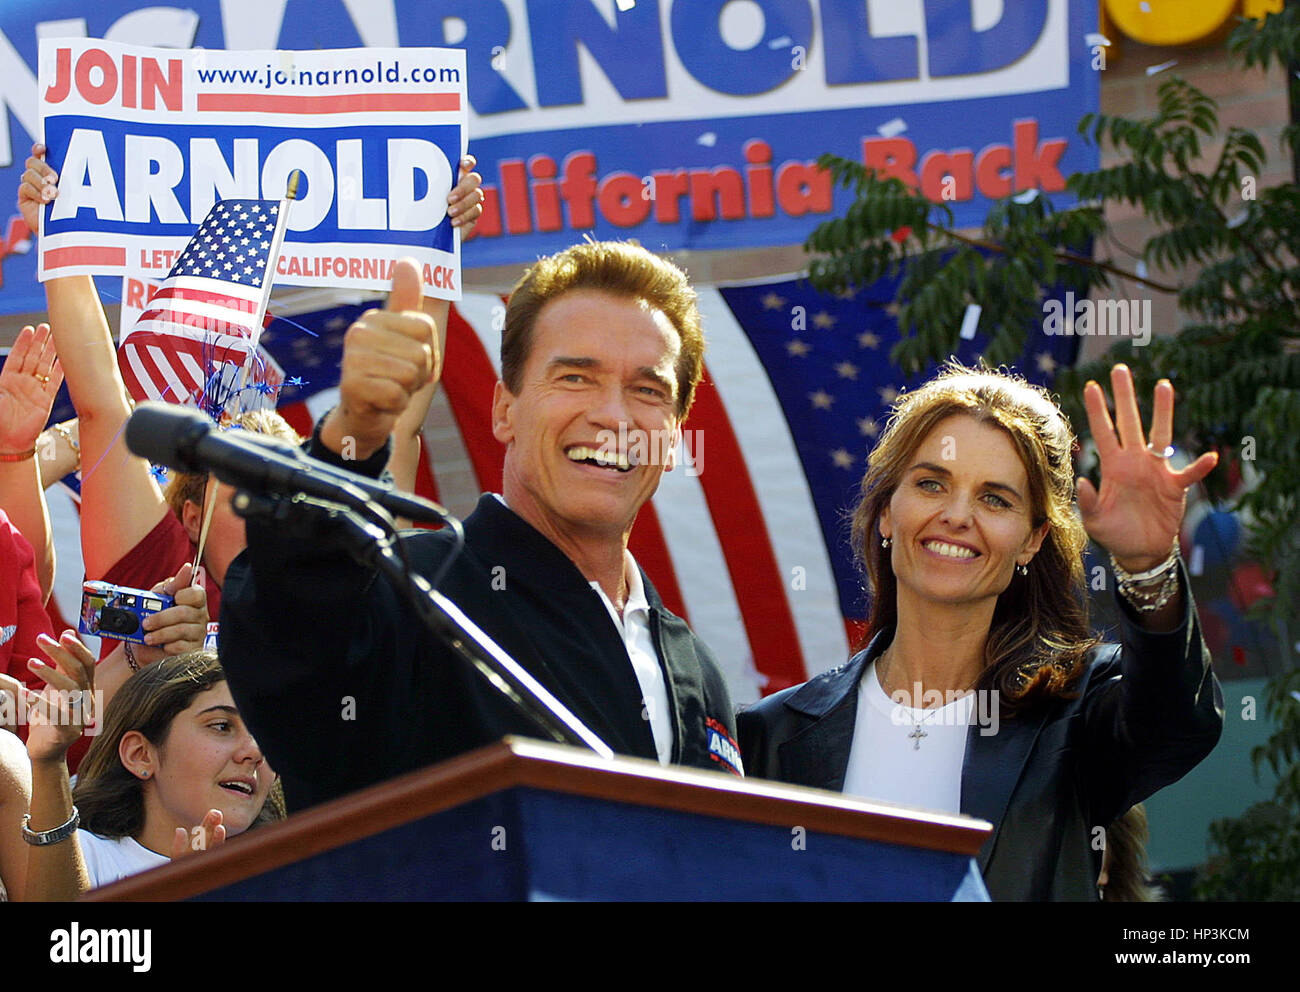 California gubernatorial candidate Arnold Schwarzenegger  and his wife, Maria Shriver, wave to the crowd during a campaign rally Modesto, Calif. on Saturday, 4 , October 2003. Schwarzenegger is running in the 7 October recall election. Photo by Francis Specker Stock Photo